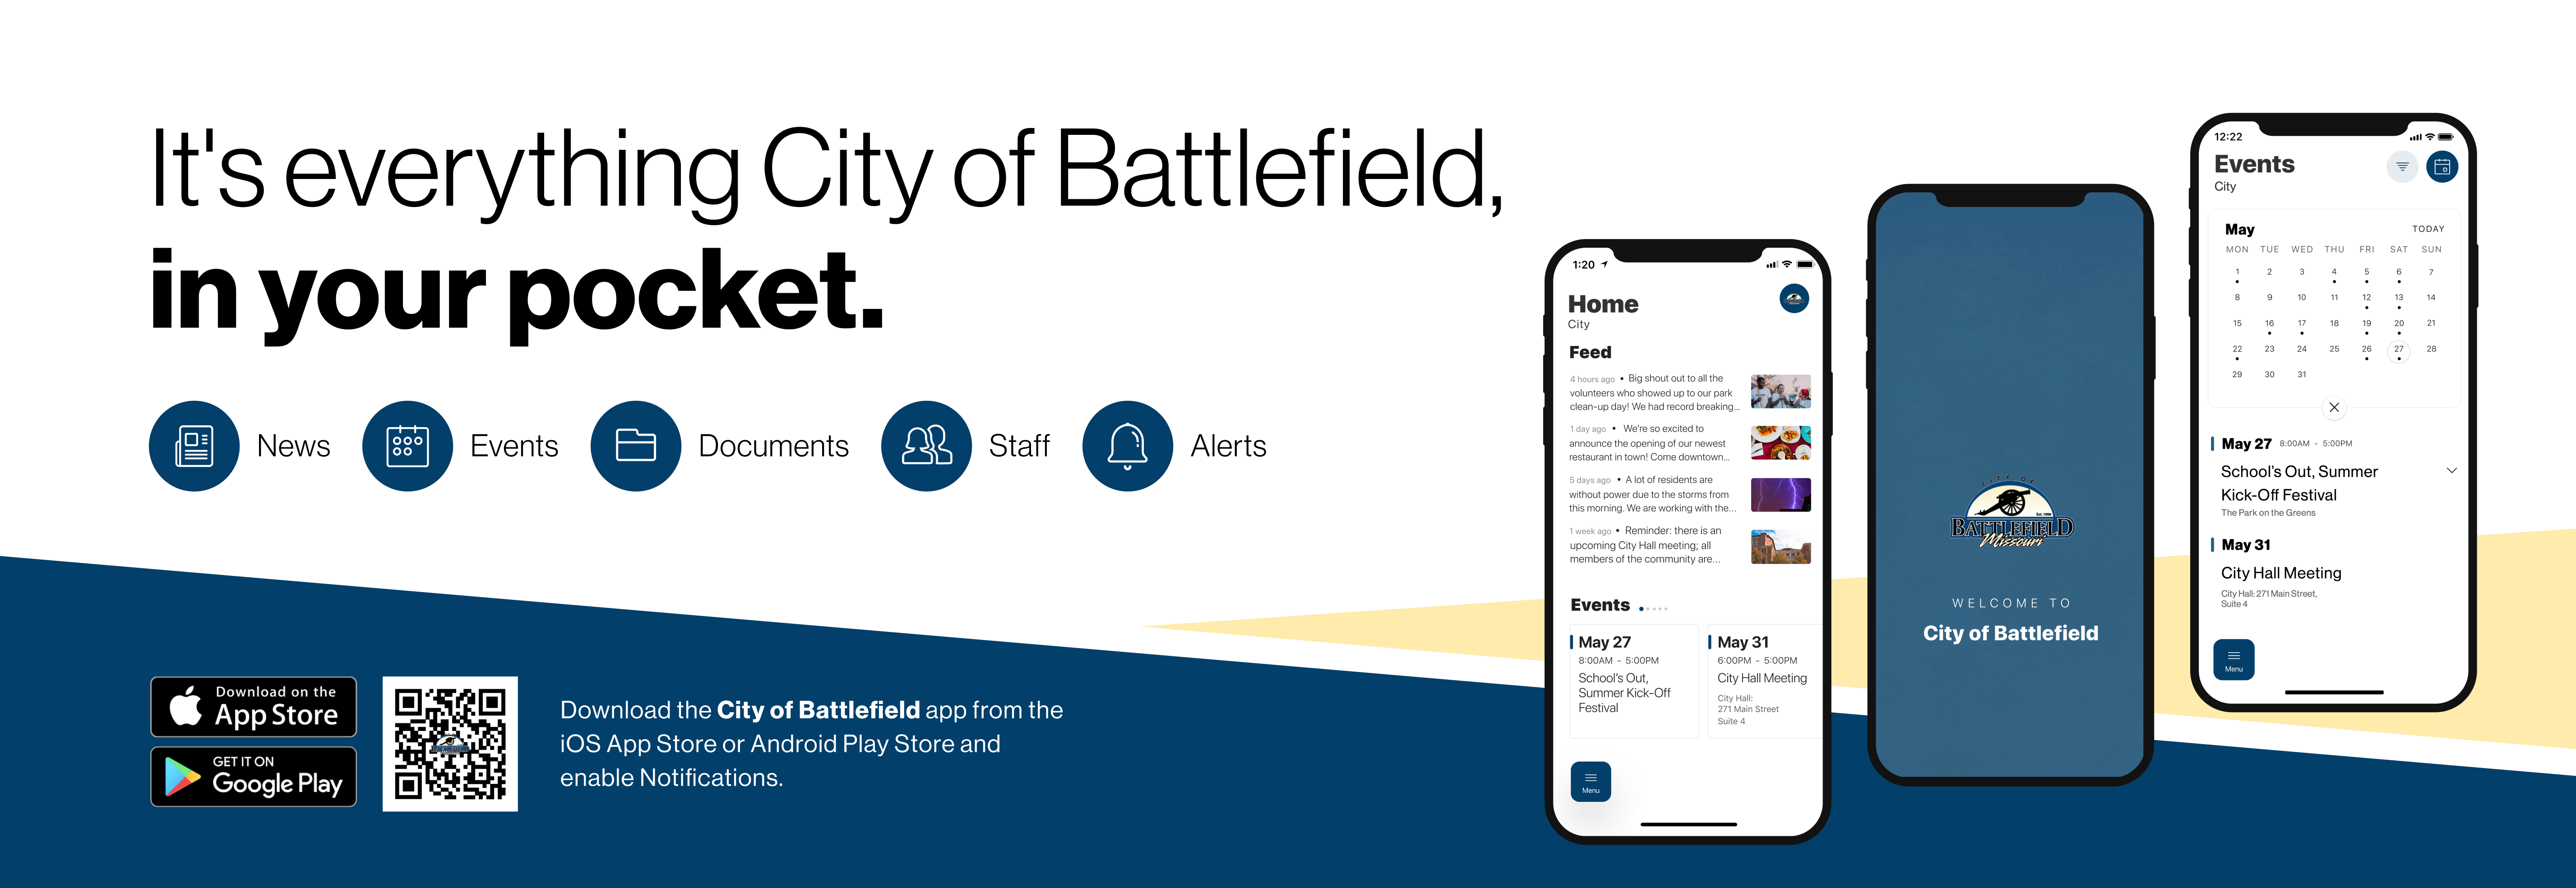 It's everything City of Battlefield, in your pocket.